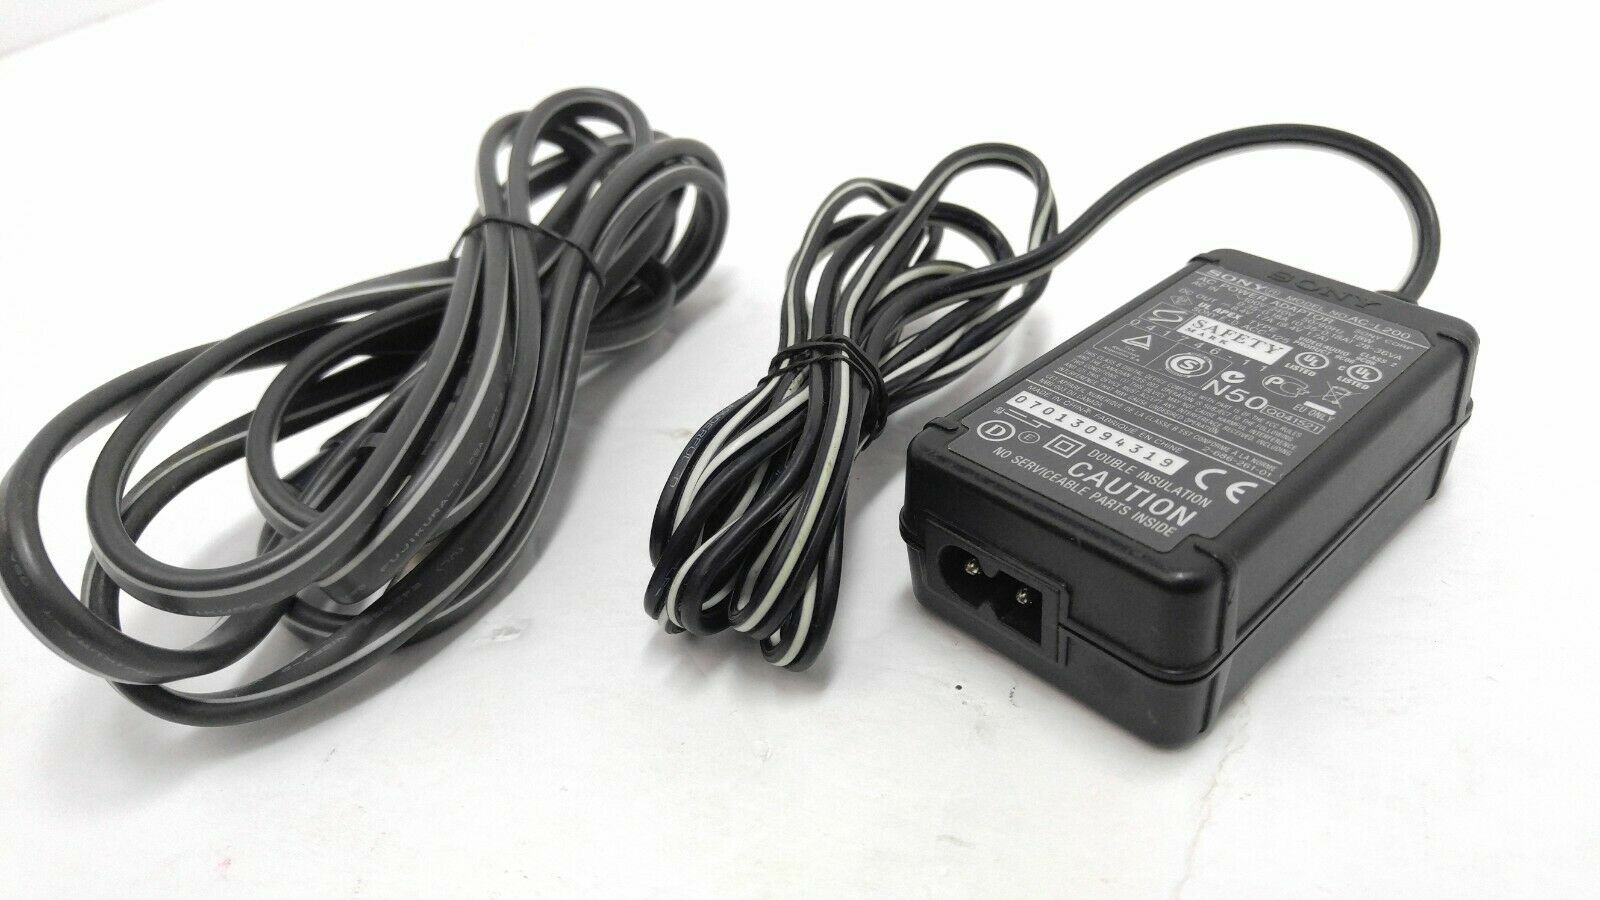 AC-L200 Sony AC Adapter for Handycam HDR-CX500 - Click Image to Close